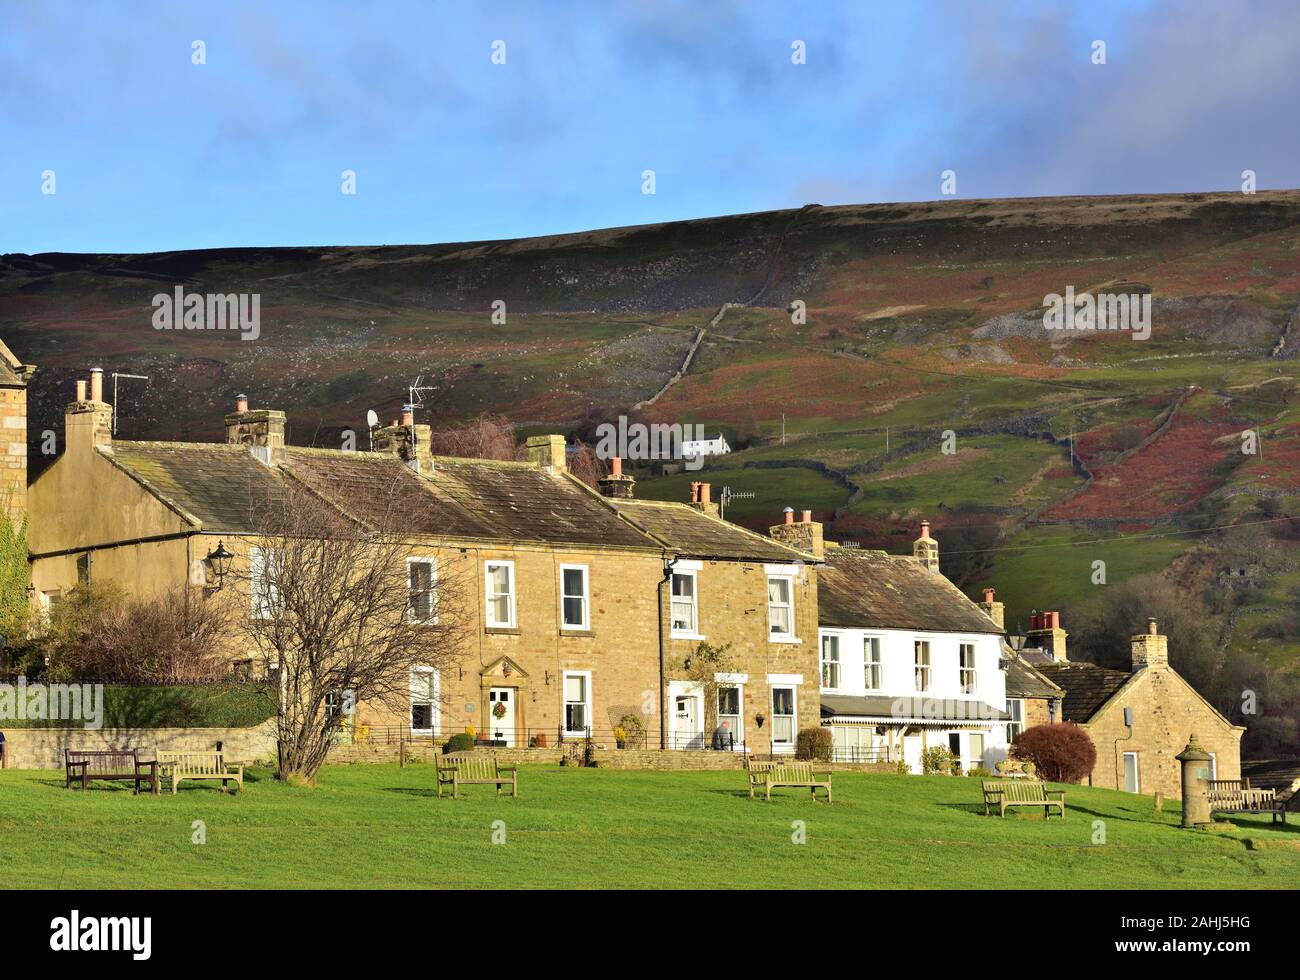 The village of Reeth, lit by winter sun and overlooked by the Fremington Edge. Stock Photo